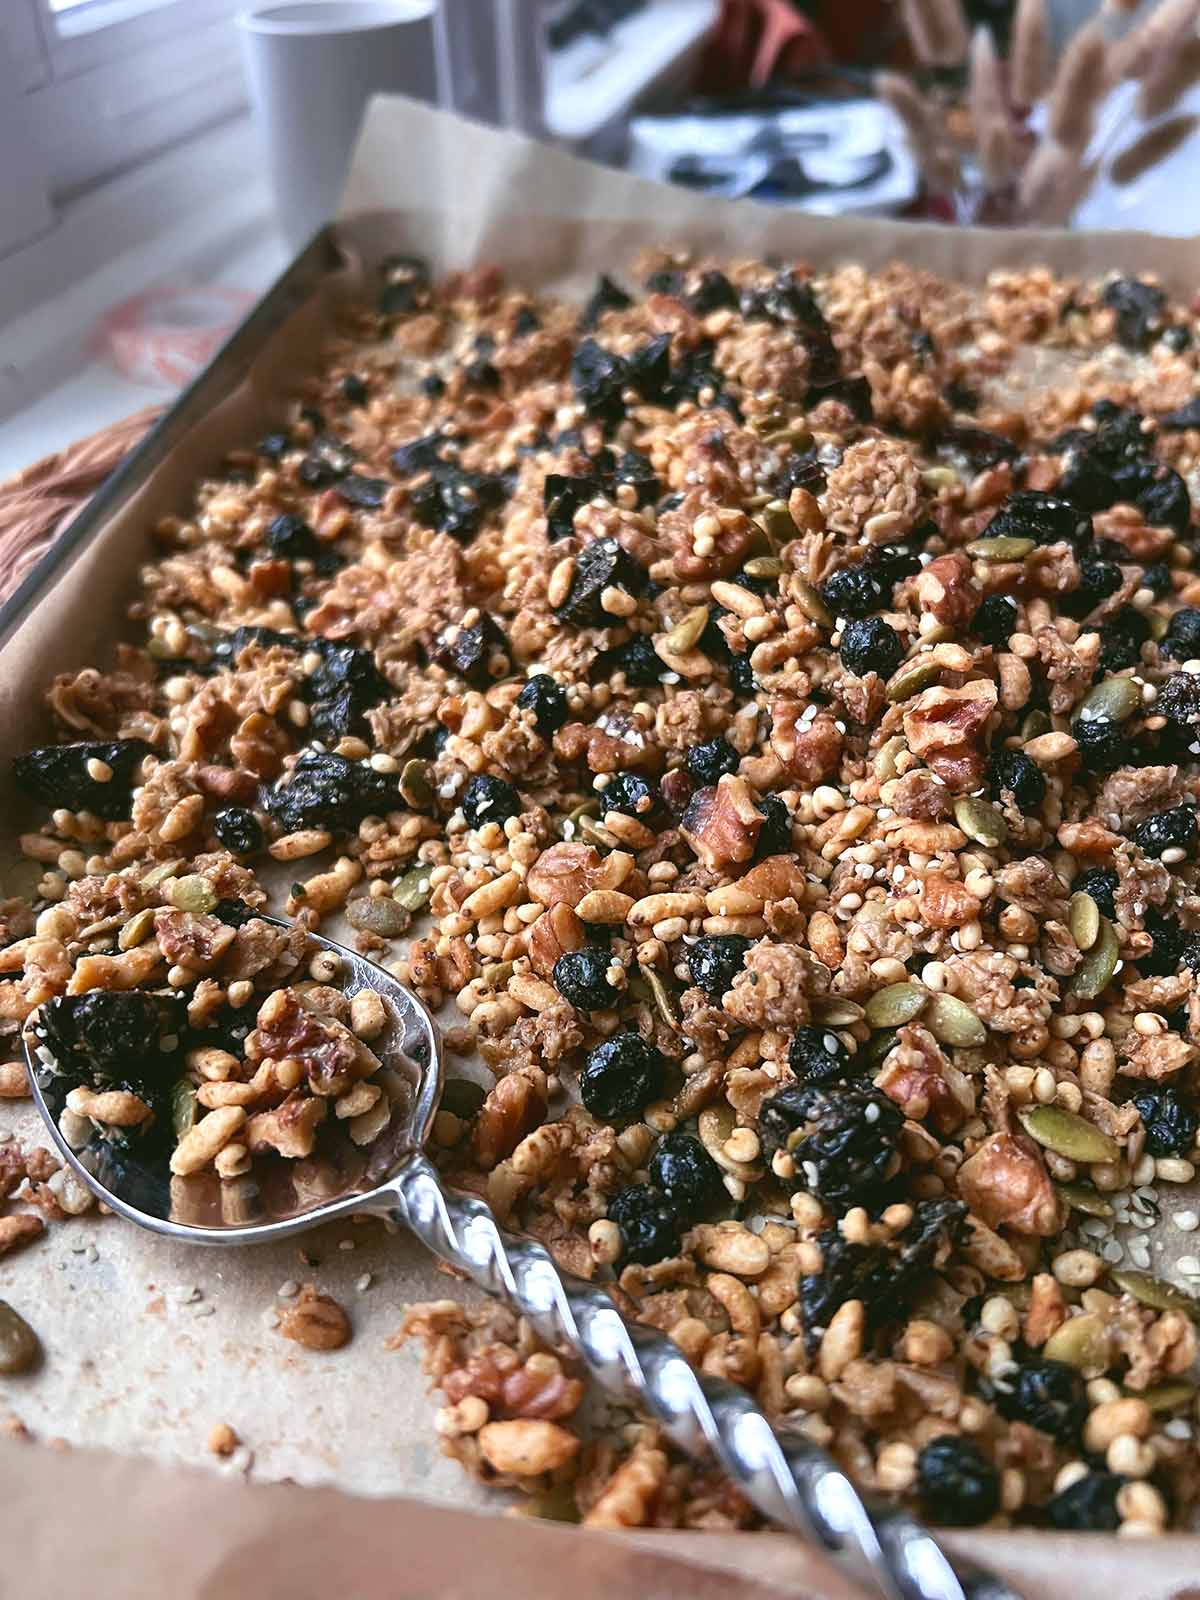 Picture showing the final granola after baking, cooling down in the baking sheet.